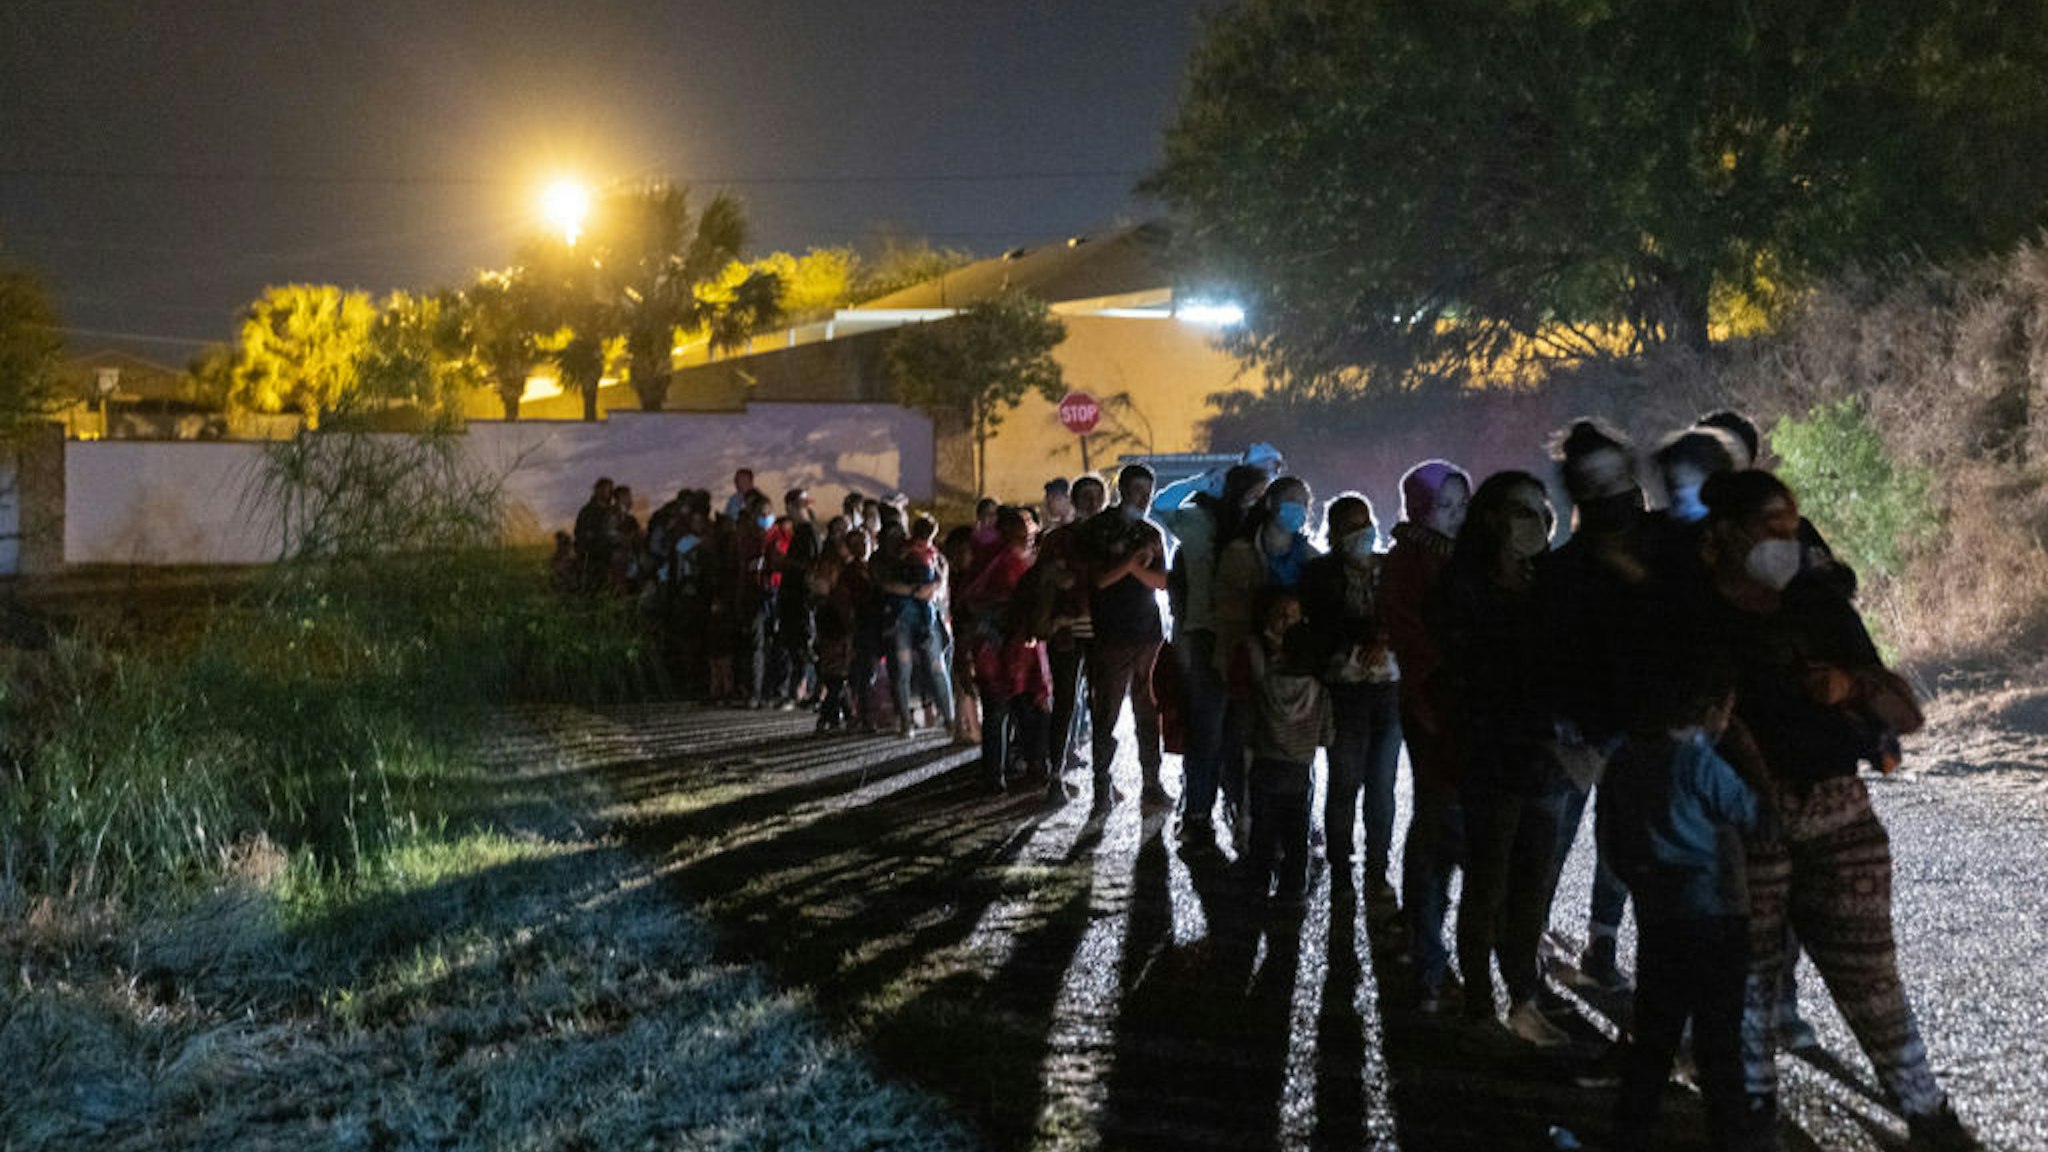 ROMA, TEXAS - APRIL 10: Central American immigrants wait to be processed by U.S. Border Patrol agents after they crossed the Rio Grande from Mexico early on April 10, 2021 in Roma, Texas. A surge of immigrants crossing into the United States, including record numbers of children, has challenged U.S. immigration agencies along the southern border.